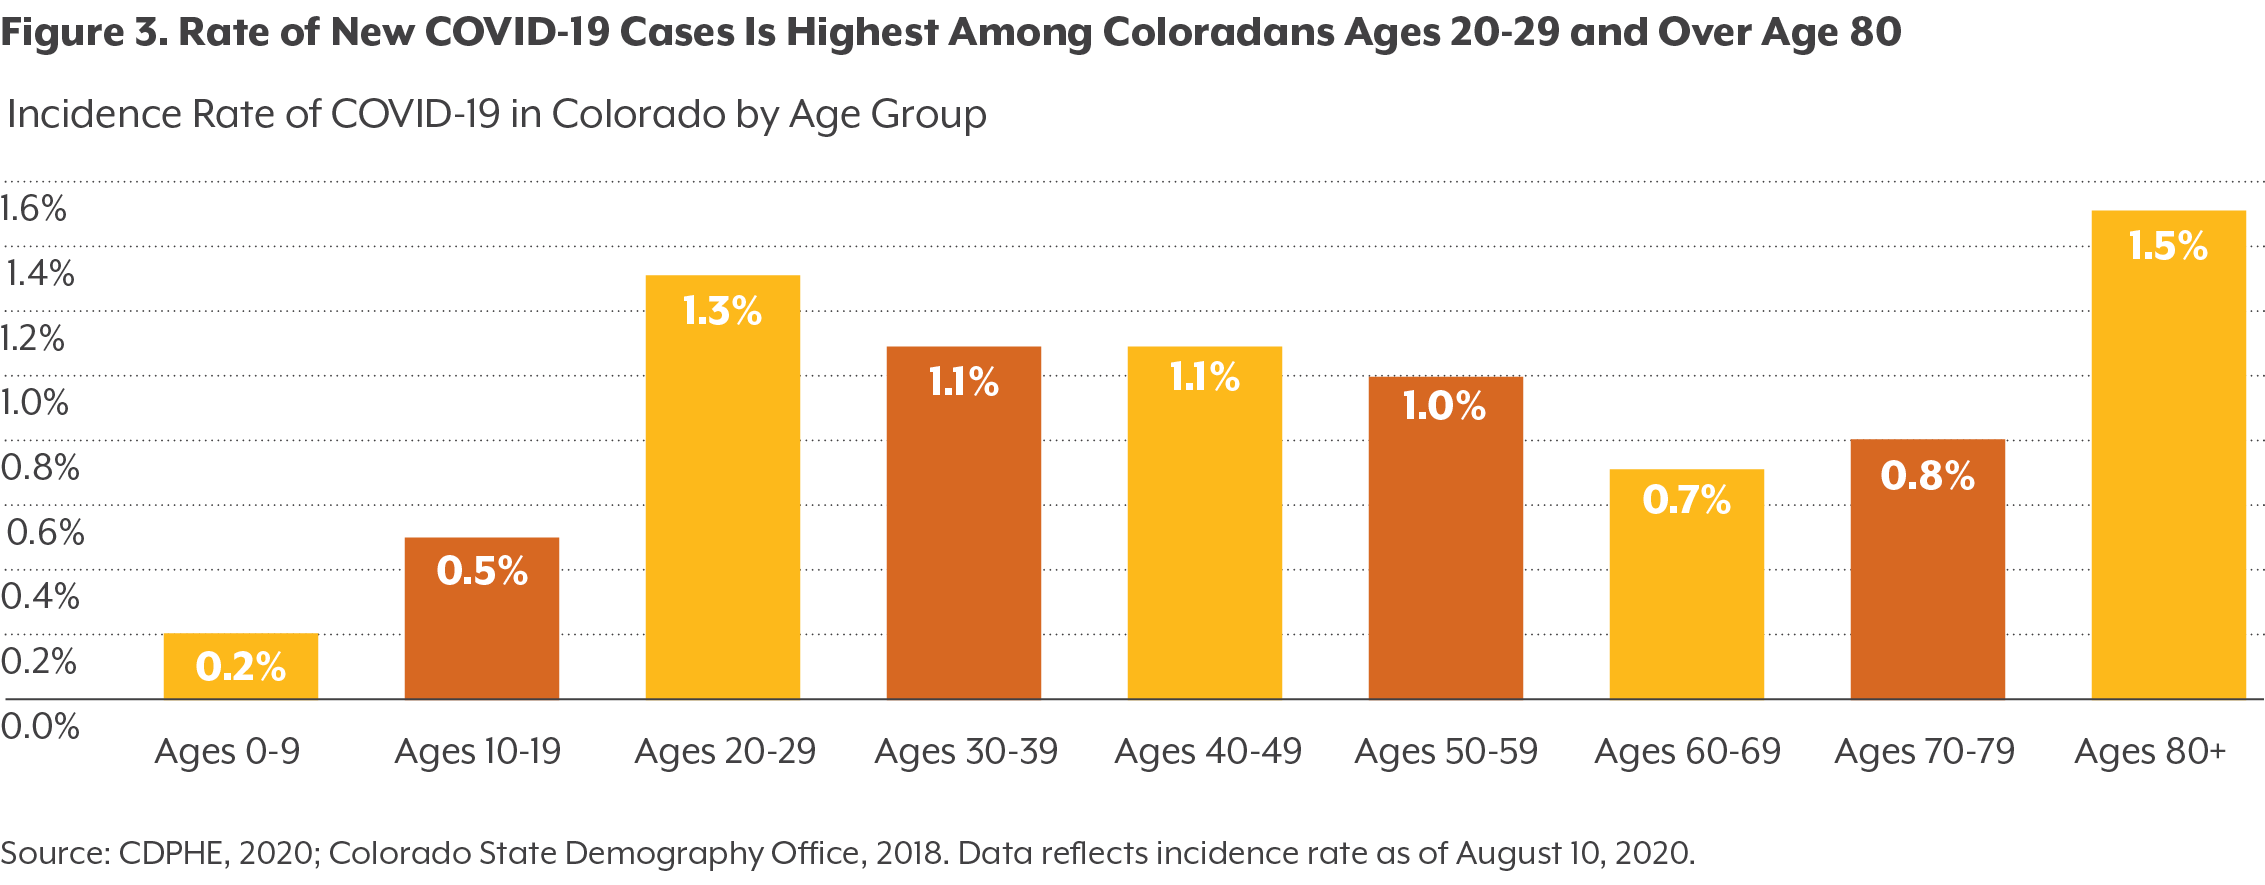 Figure 3. Rate of New COVID-19 Cases Is Highest Among Coloradans Ages 20-29 and Over Age 80